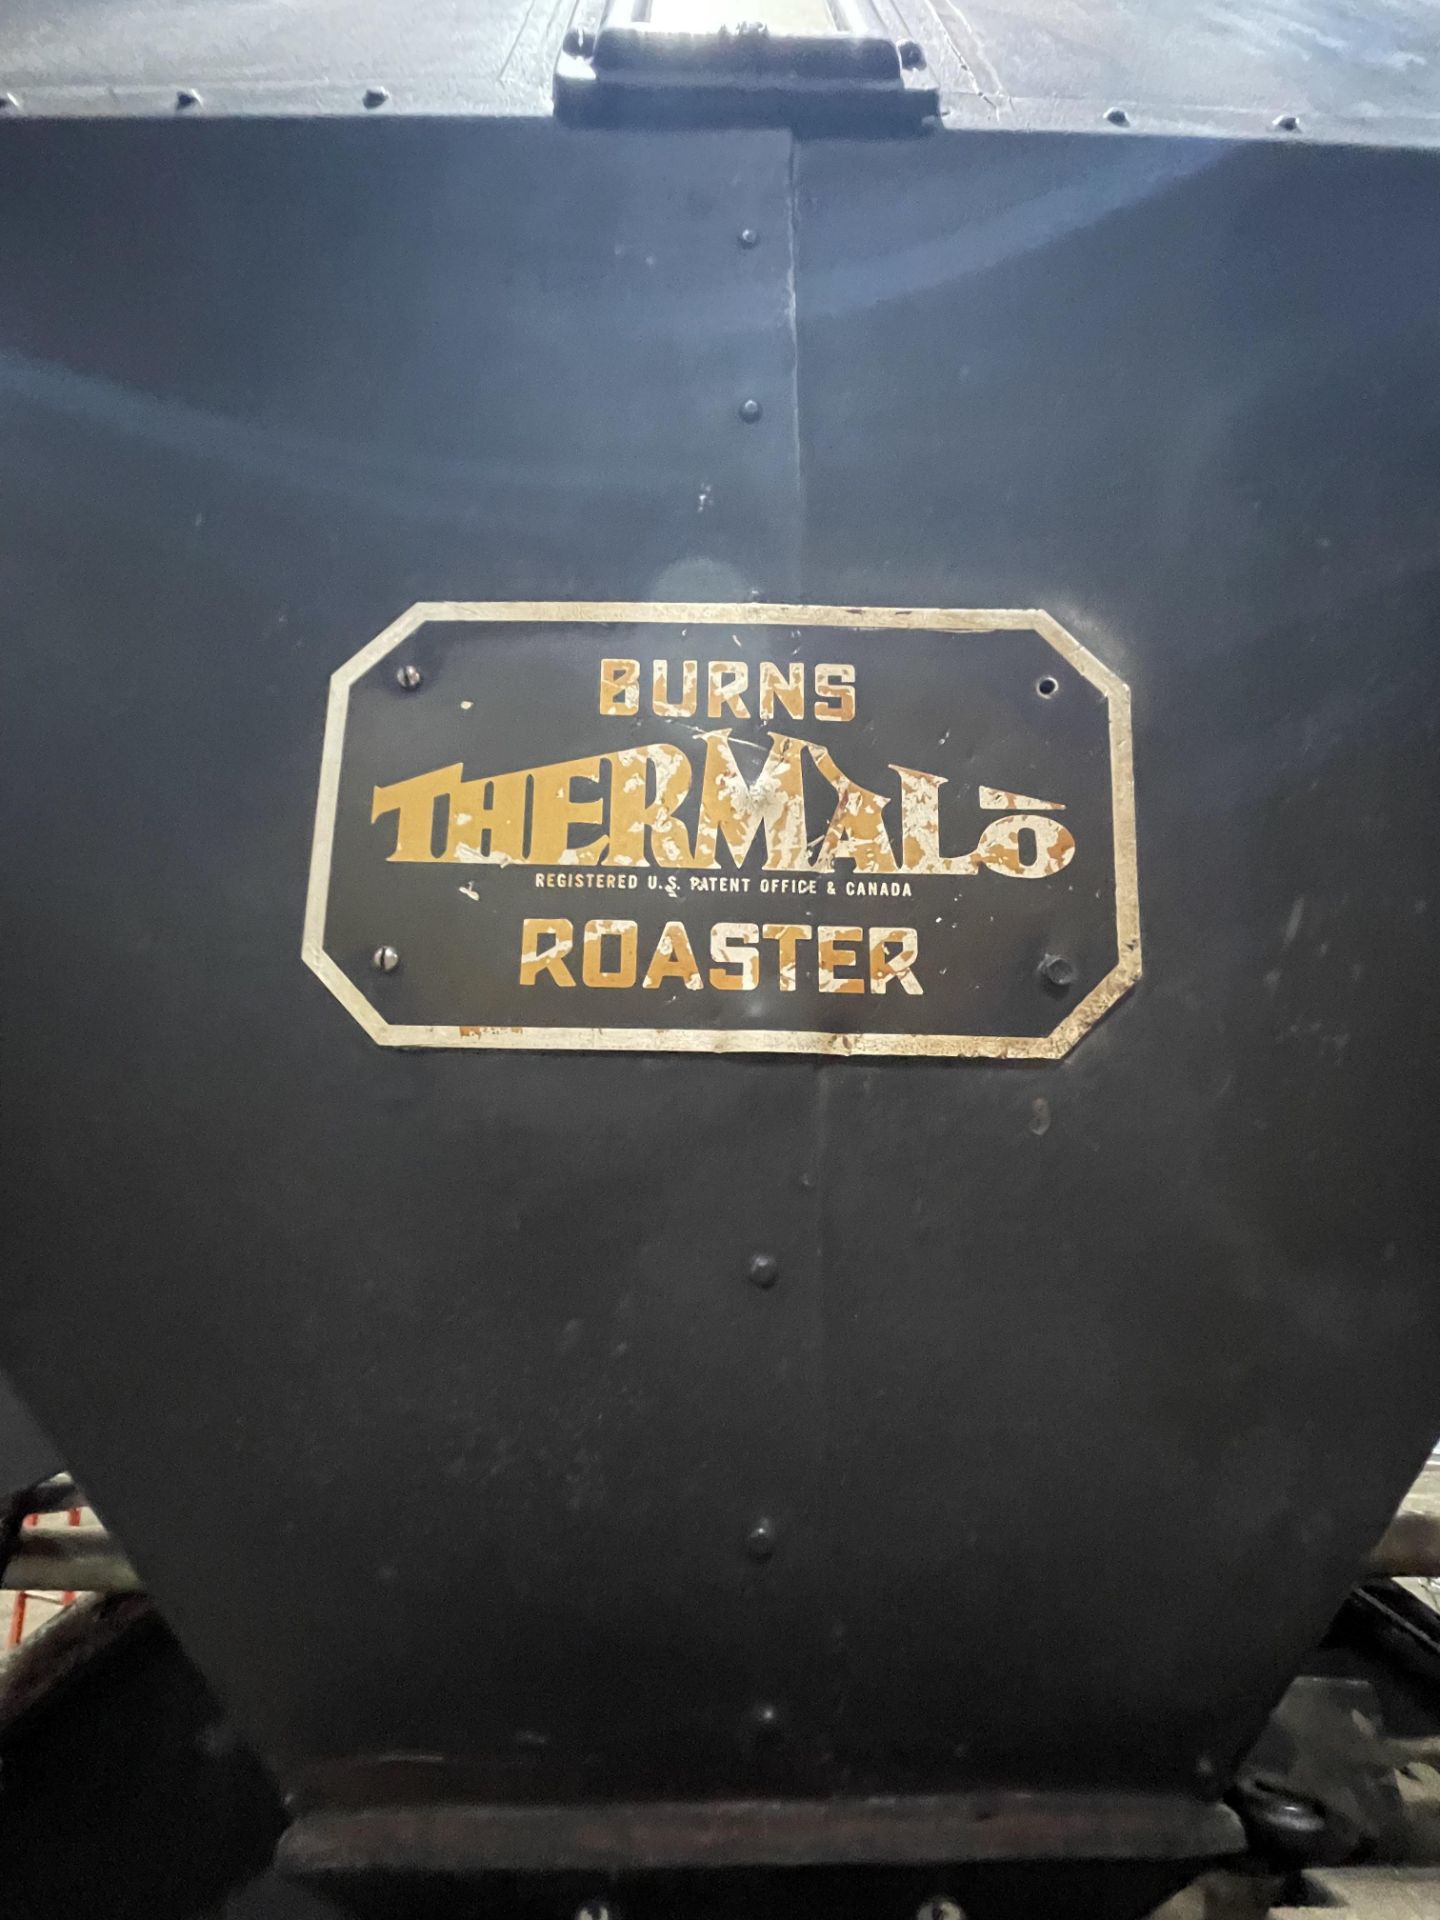 JABEZ BURNS THERMALO 500 LB COFFFEE ROASTER, NO. 23RS ACO, 500 DEGREE MAX, AERATED DRUM, FEED HOPPER - Image 25 of 30